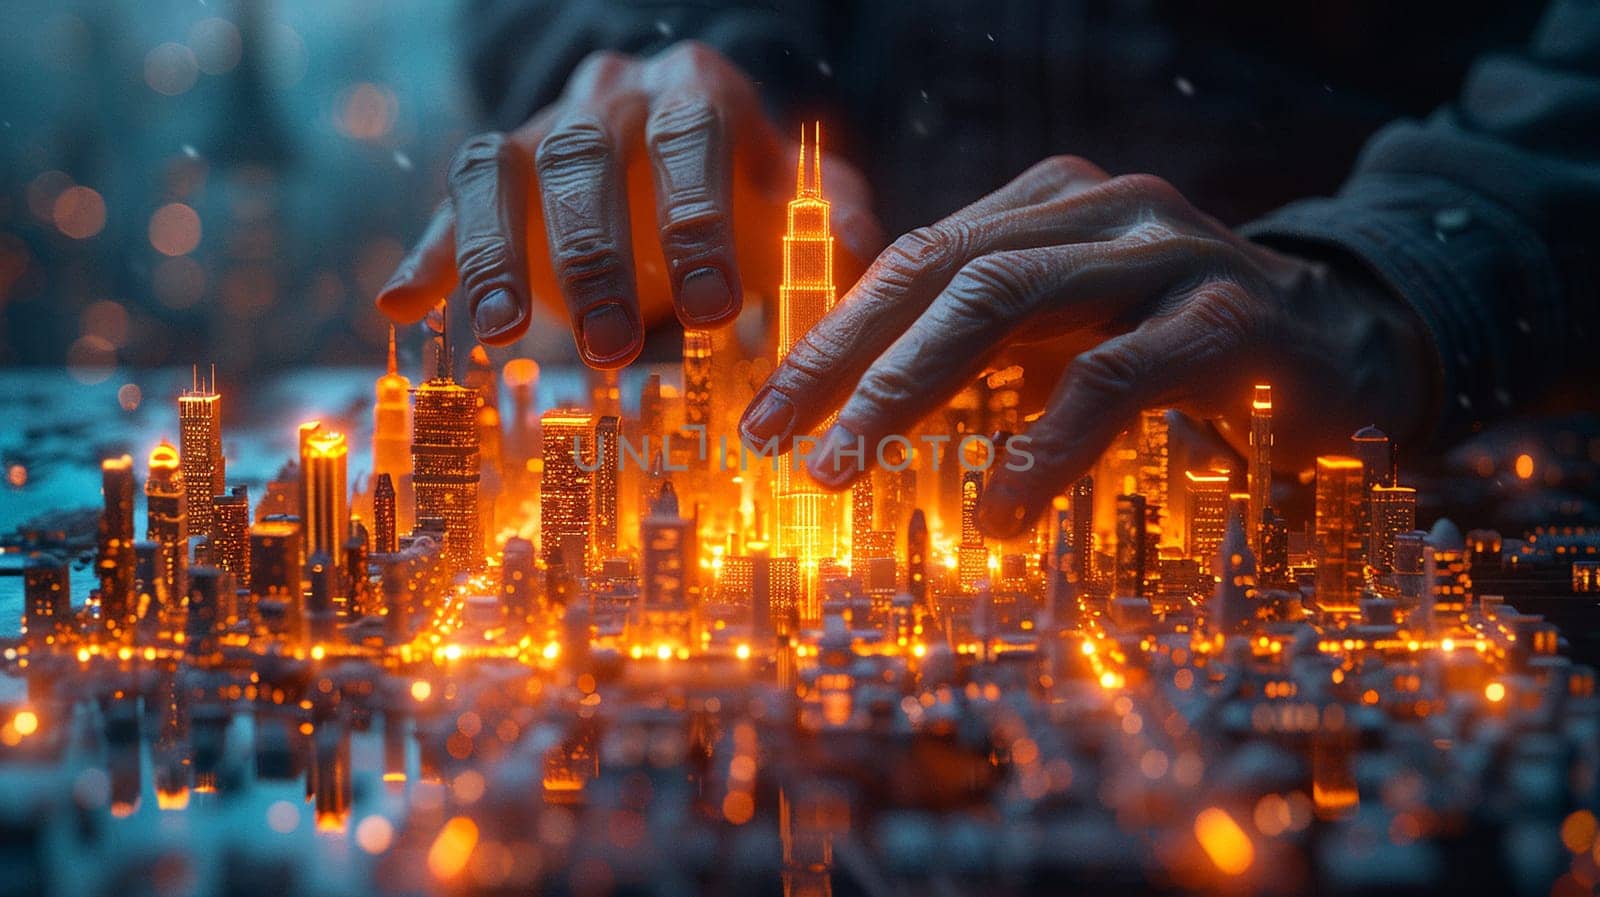 Architect's hands over a holographic city model, illustrated with a blend of realism and digital artistry.